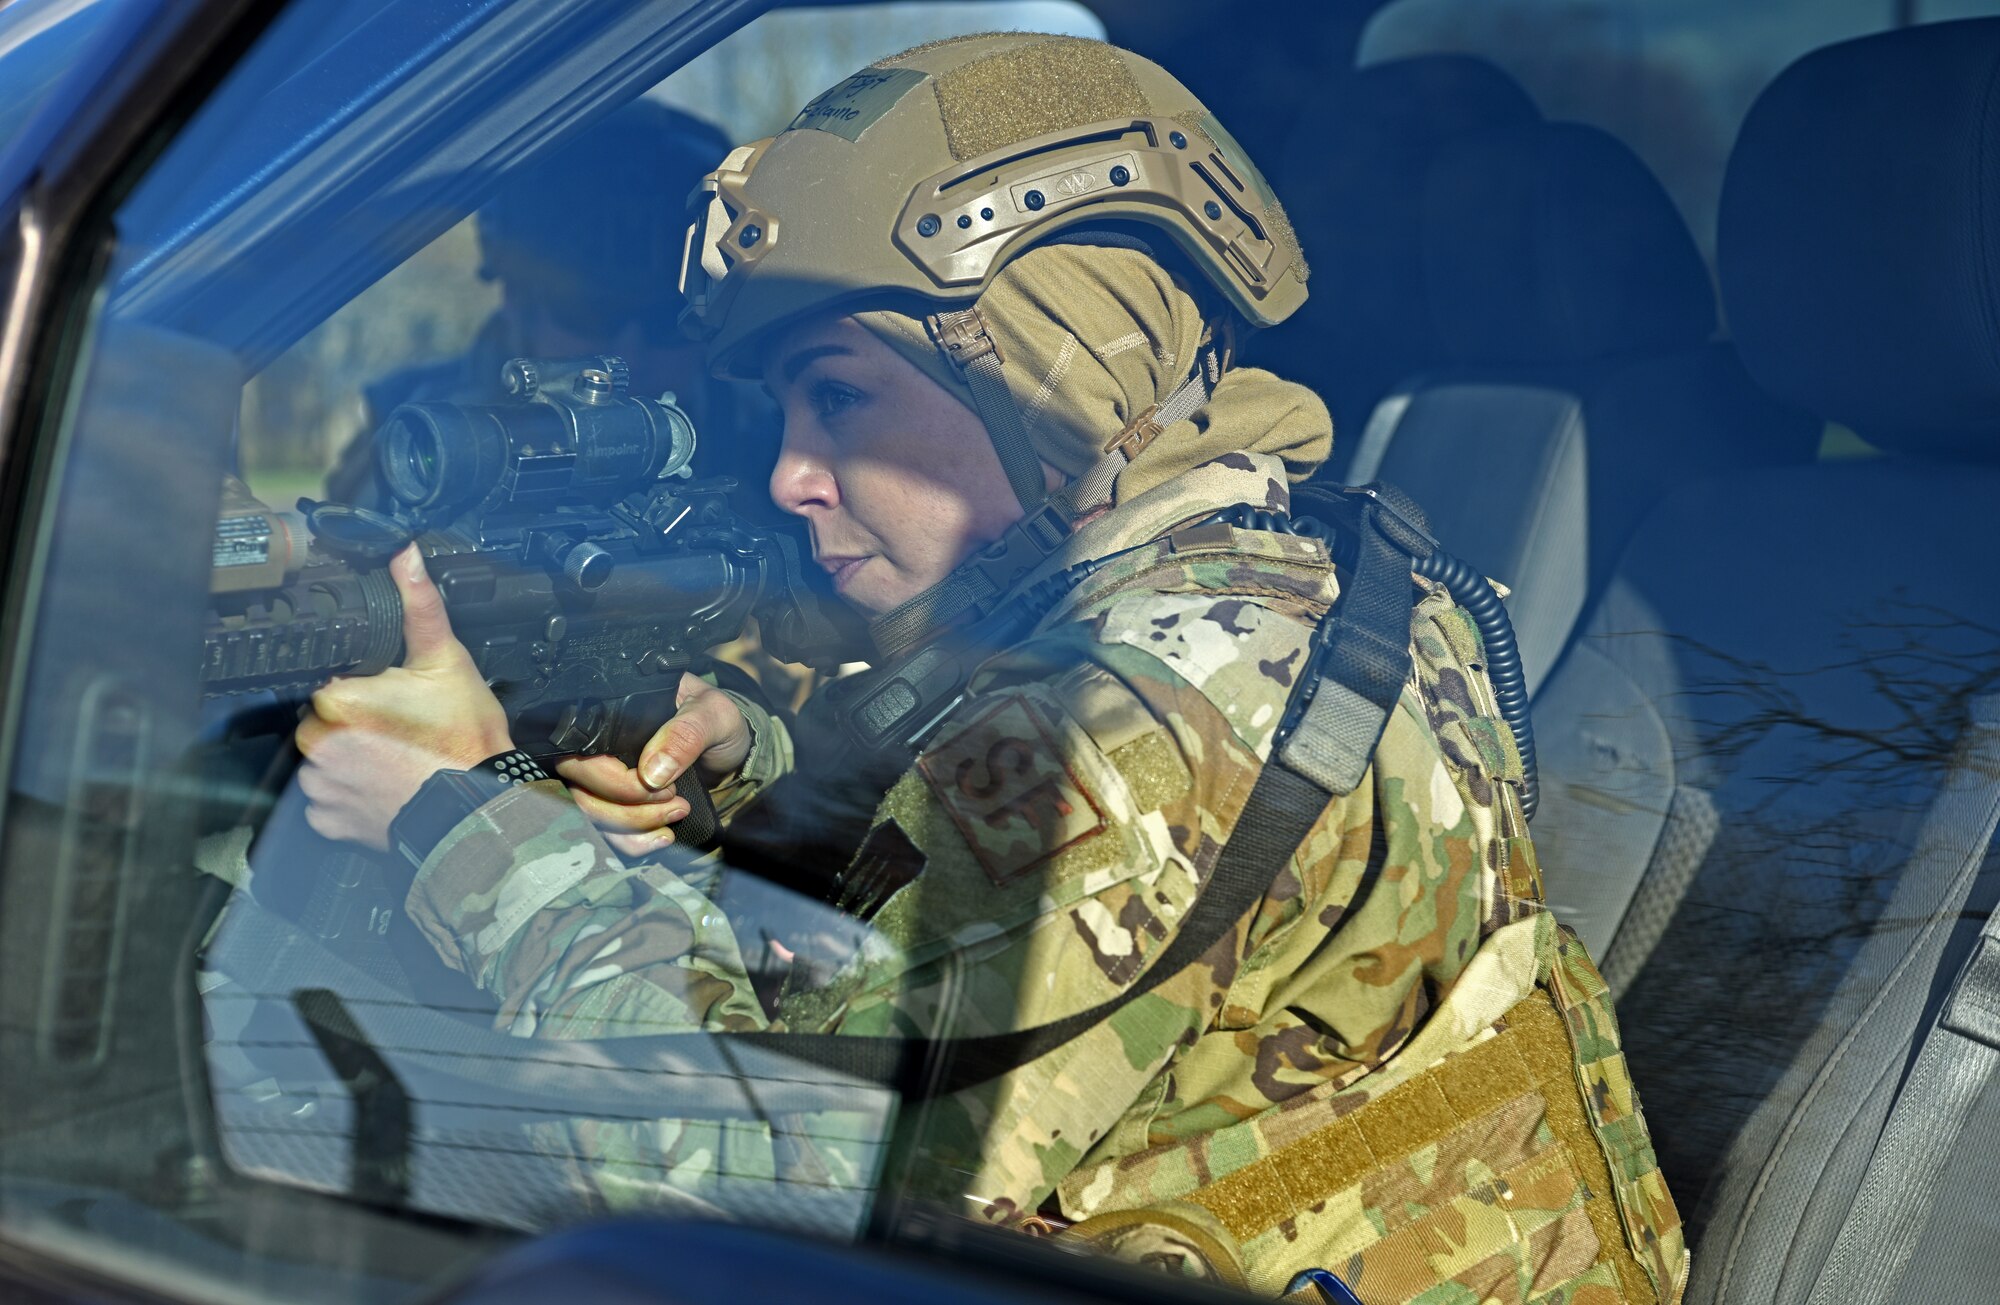 Technical Sgt. Jessica Vizcaino, 100th Security Forces Squadron flight chief, checks and clears a vehicle-borne improvised explosive device scene during a readiness exercise at RAF Mildenhall, England, Feb. 11, 2020. The main purpose of the exercise was to demonstrate how rapidly Bloody Hundredth Airmen are able to organize an entire wing and deal with simulated real-world scenarios. (U.S. Air Force photo by Senior Airman Brandon Esau)